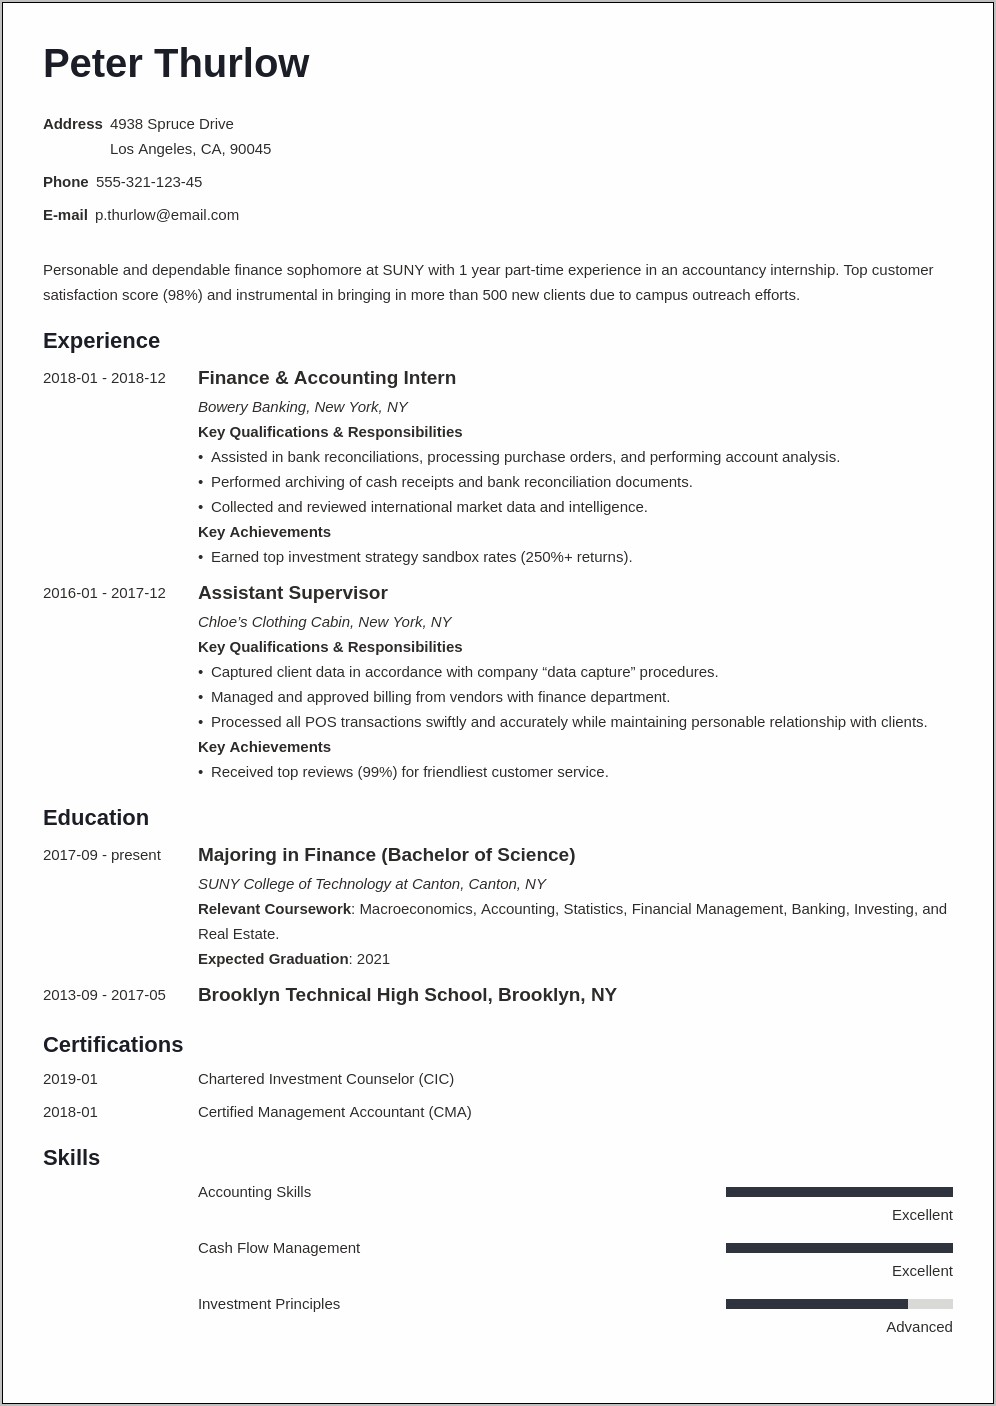 Resume Objective For Internship And Rotational Programs